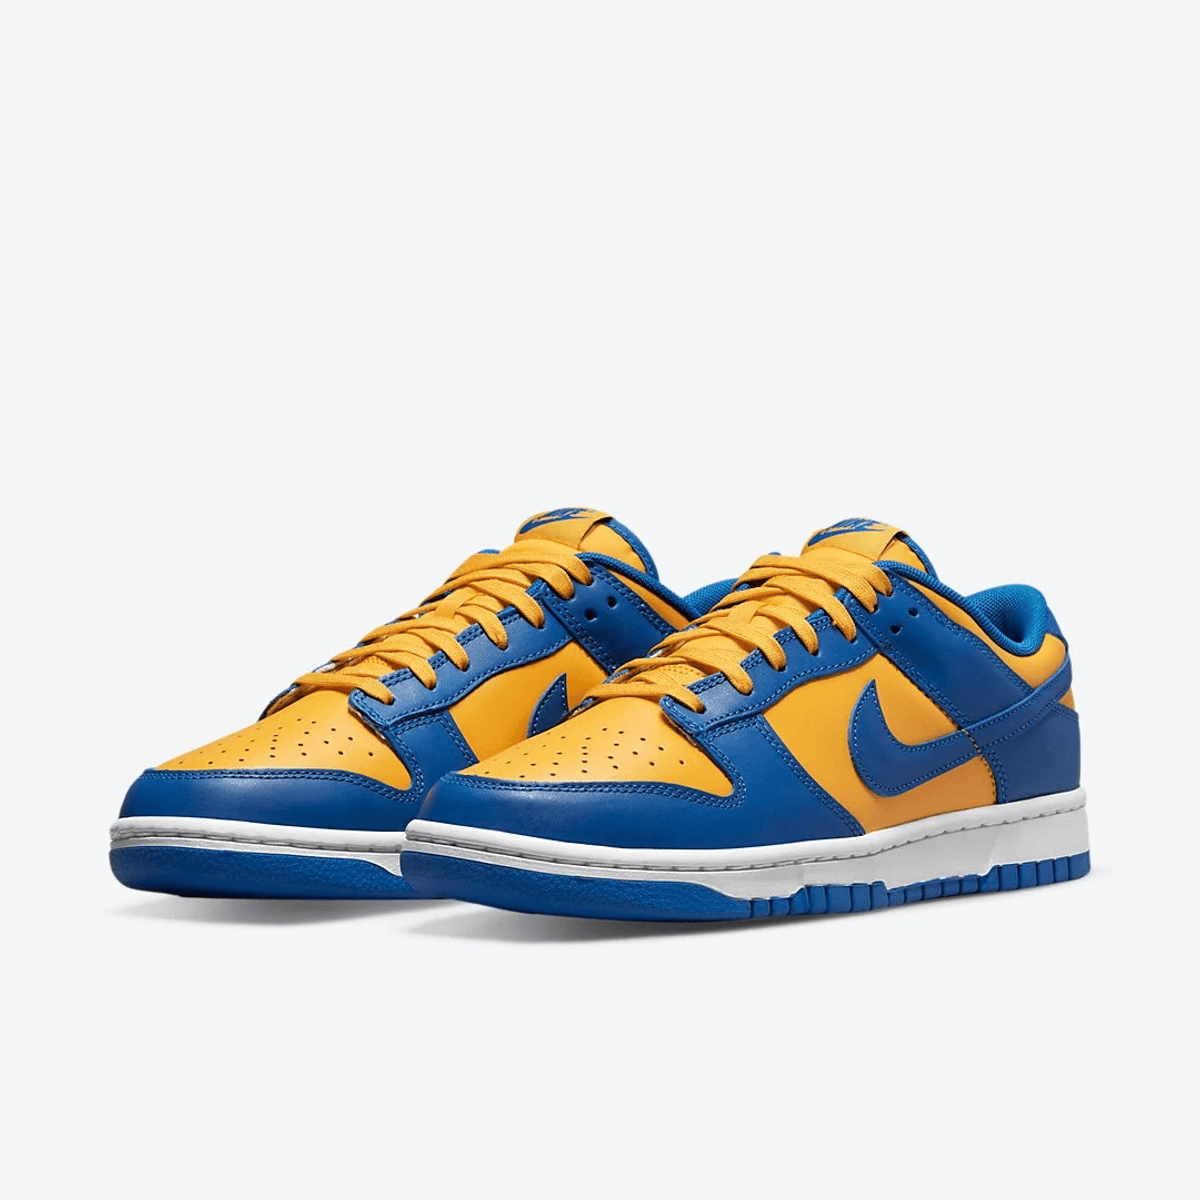 The Nike Dunk Low UCLA Showcases Nikes Class